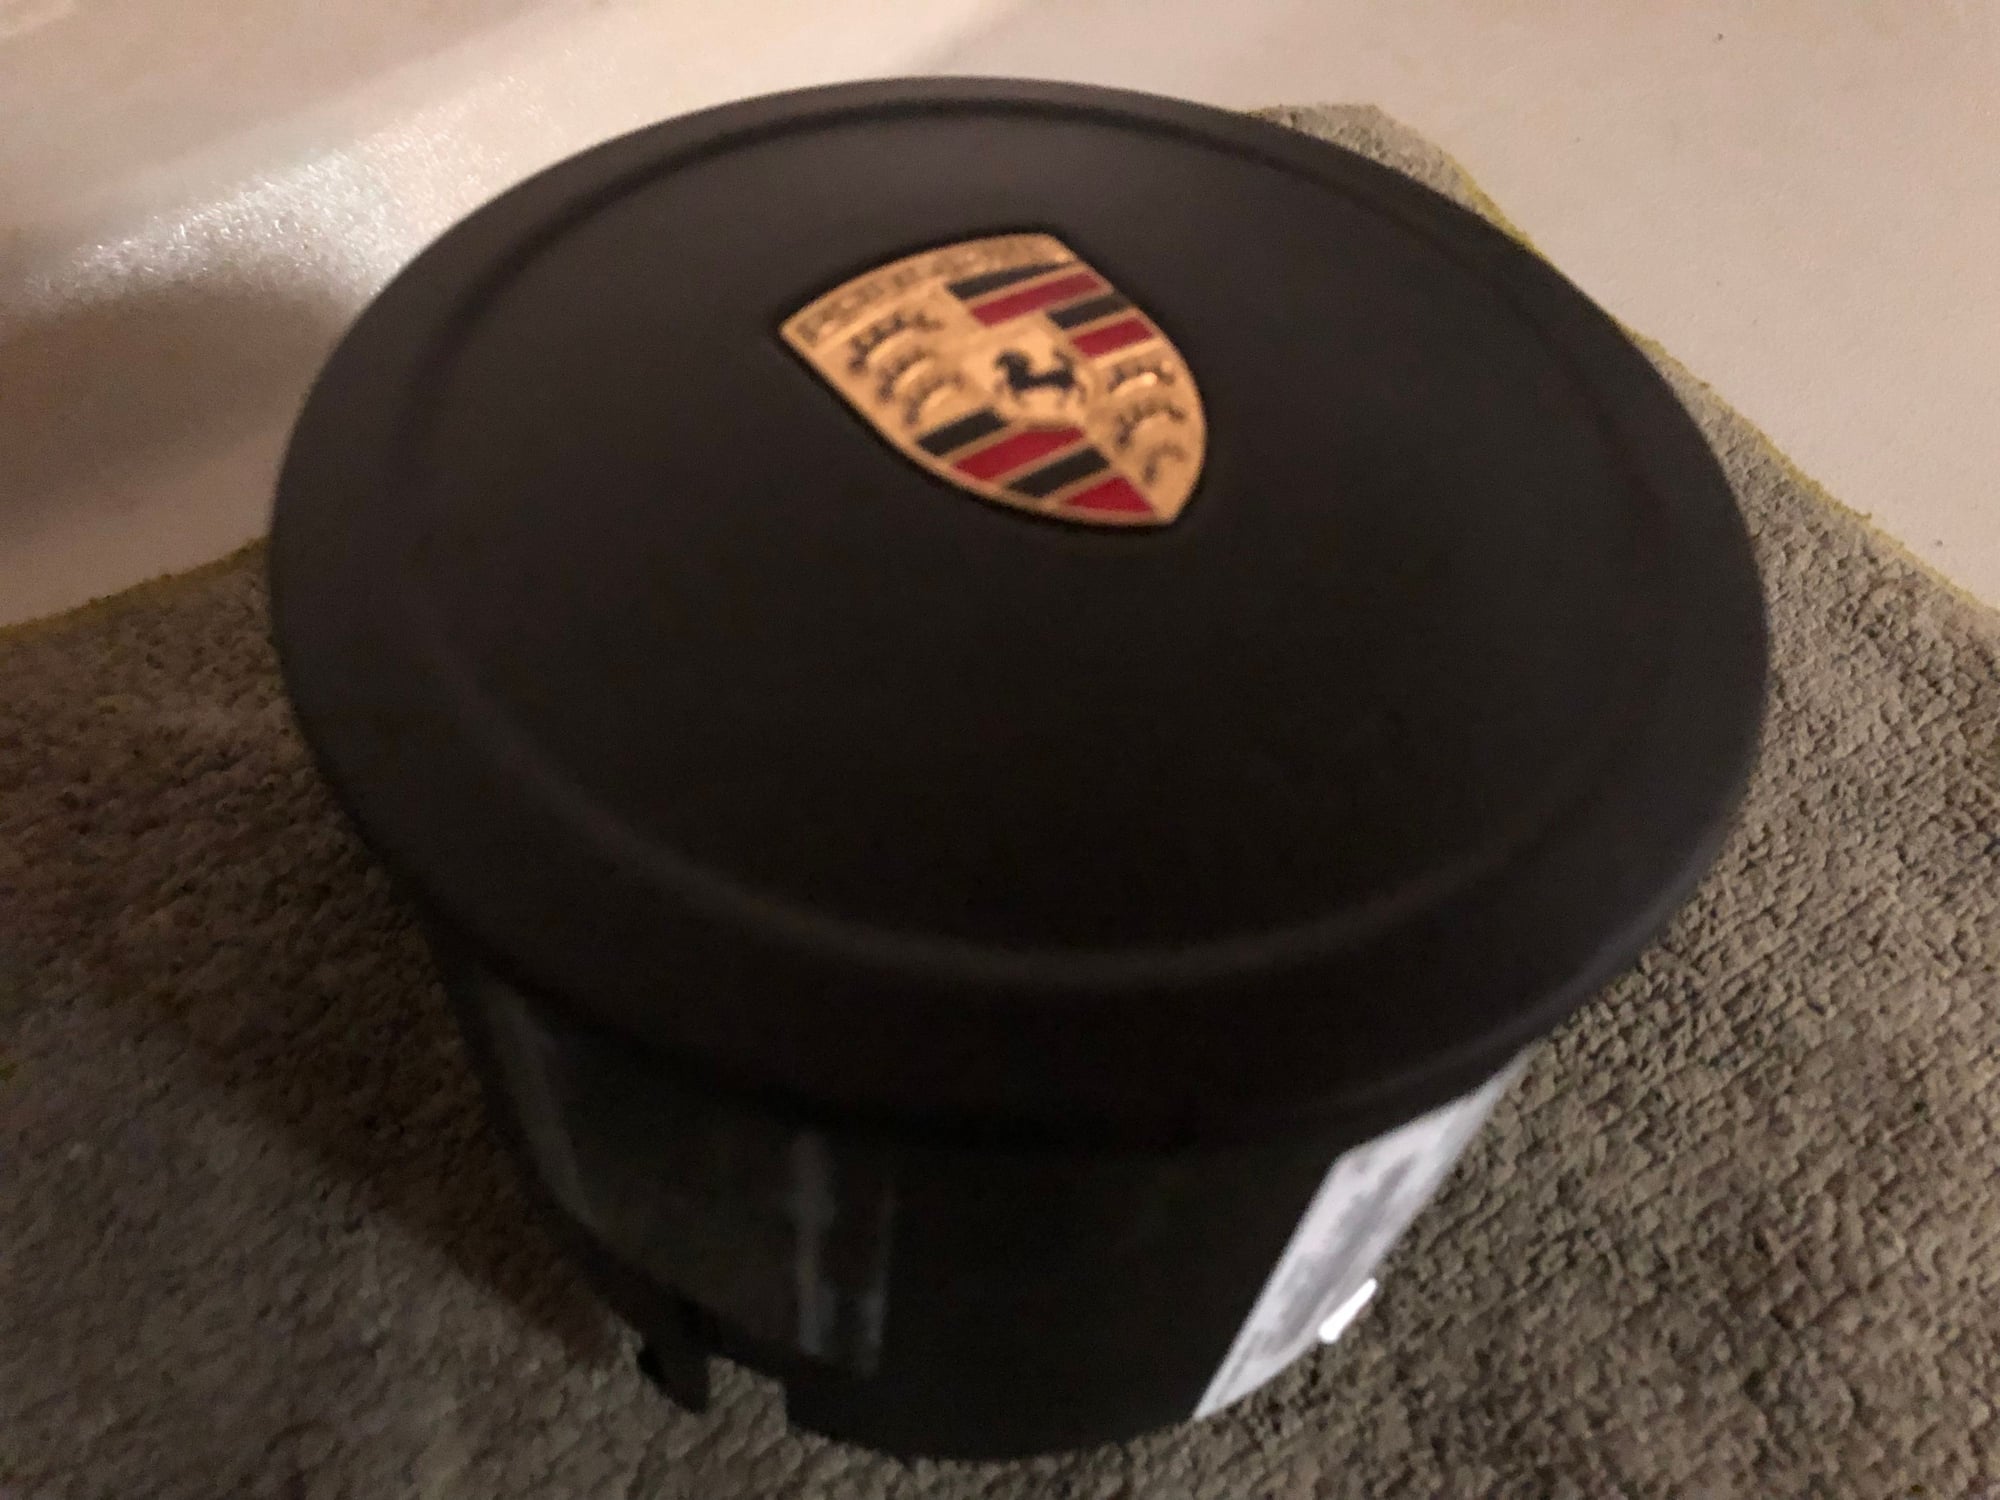 Steering/Suspension - LEATHER 991.1 airbag FS, excellent condition - New - 2012 to 2016 Porsche 911 - Sarasota, FL 34202, United States